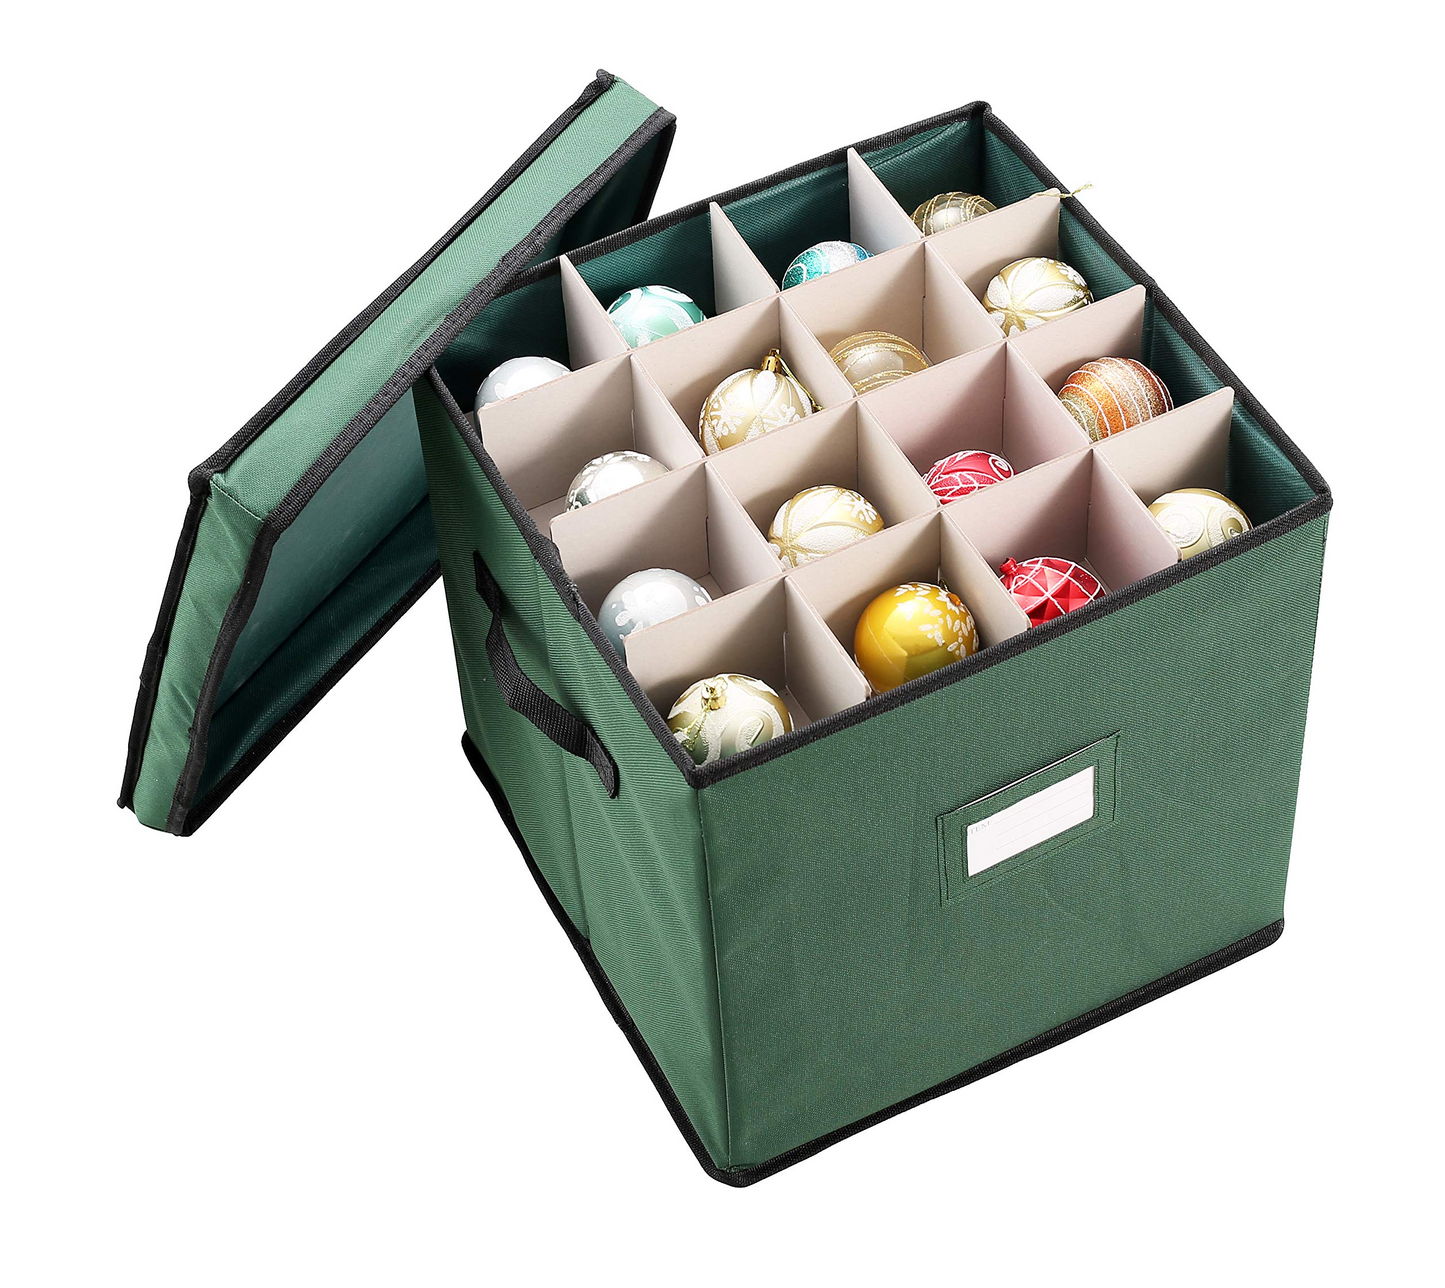 Christmas Ornament Storage Box with Adjustable Dividers